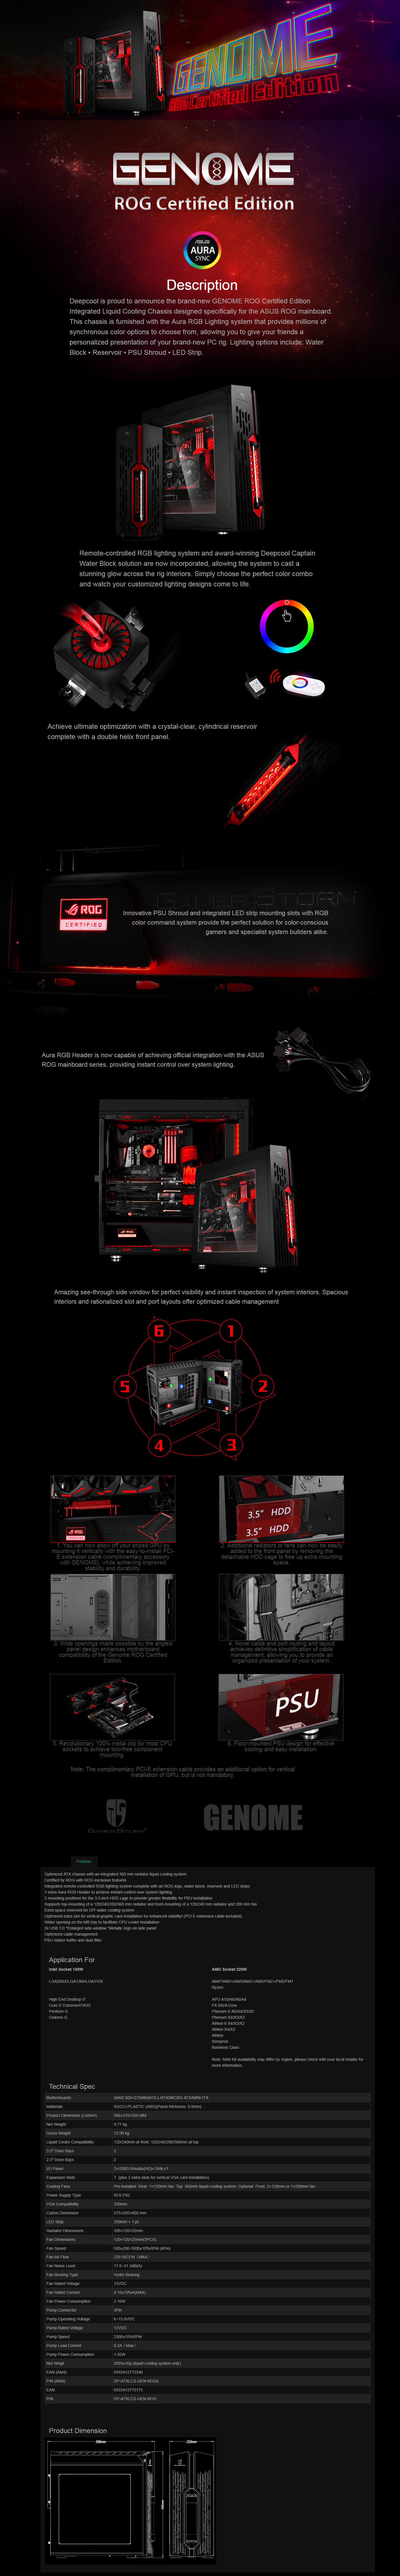  Buy Online Deepcool GENOME ROG Certified Edition Mid Tower Case with 360MM Liquid Cooling - Black-Red